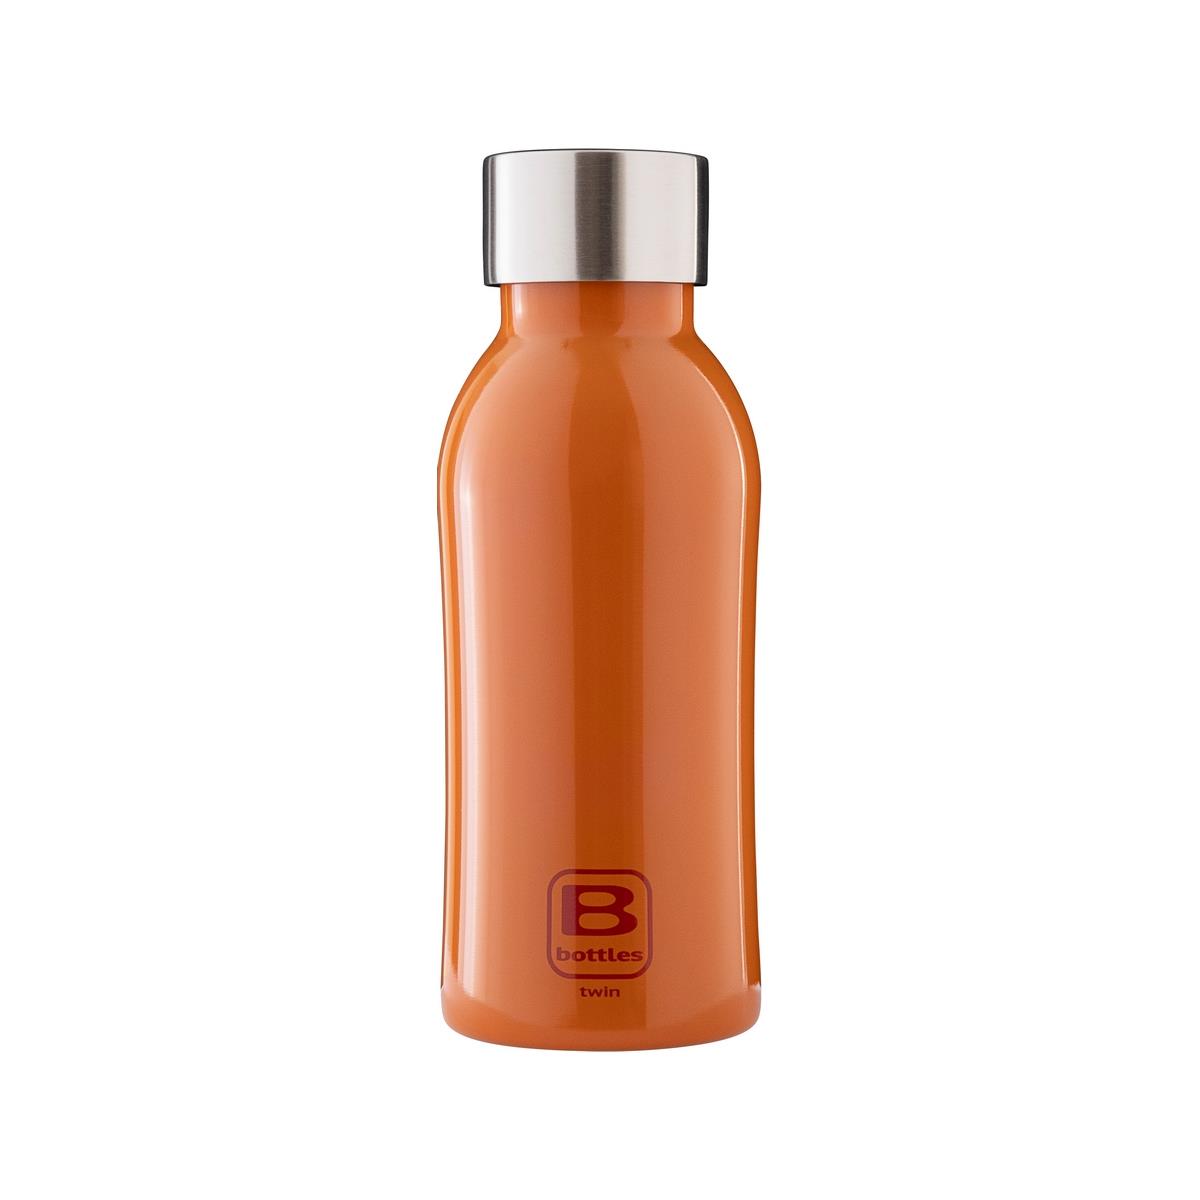 photo B Bottles Twin - Glossy Orange - 350 ml - Double wall thermal bottle in 18/10 stainless steel